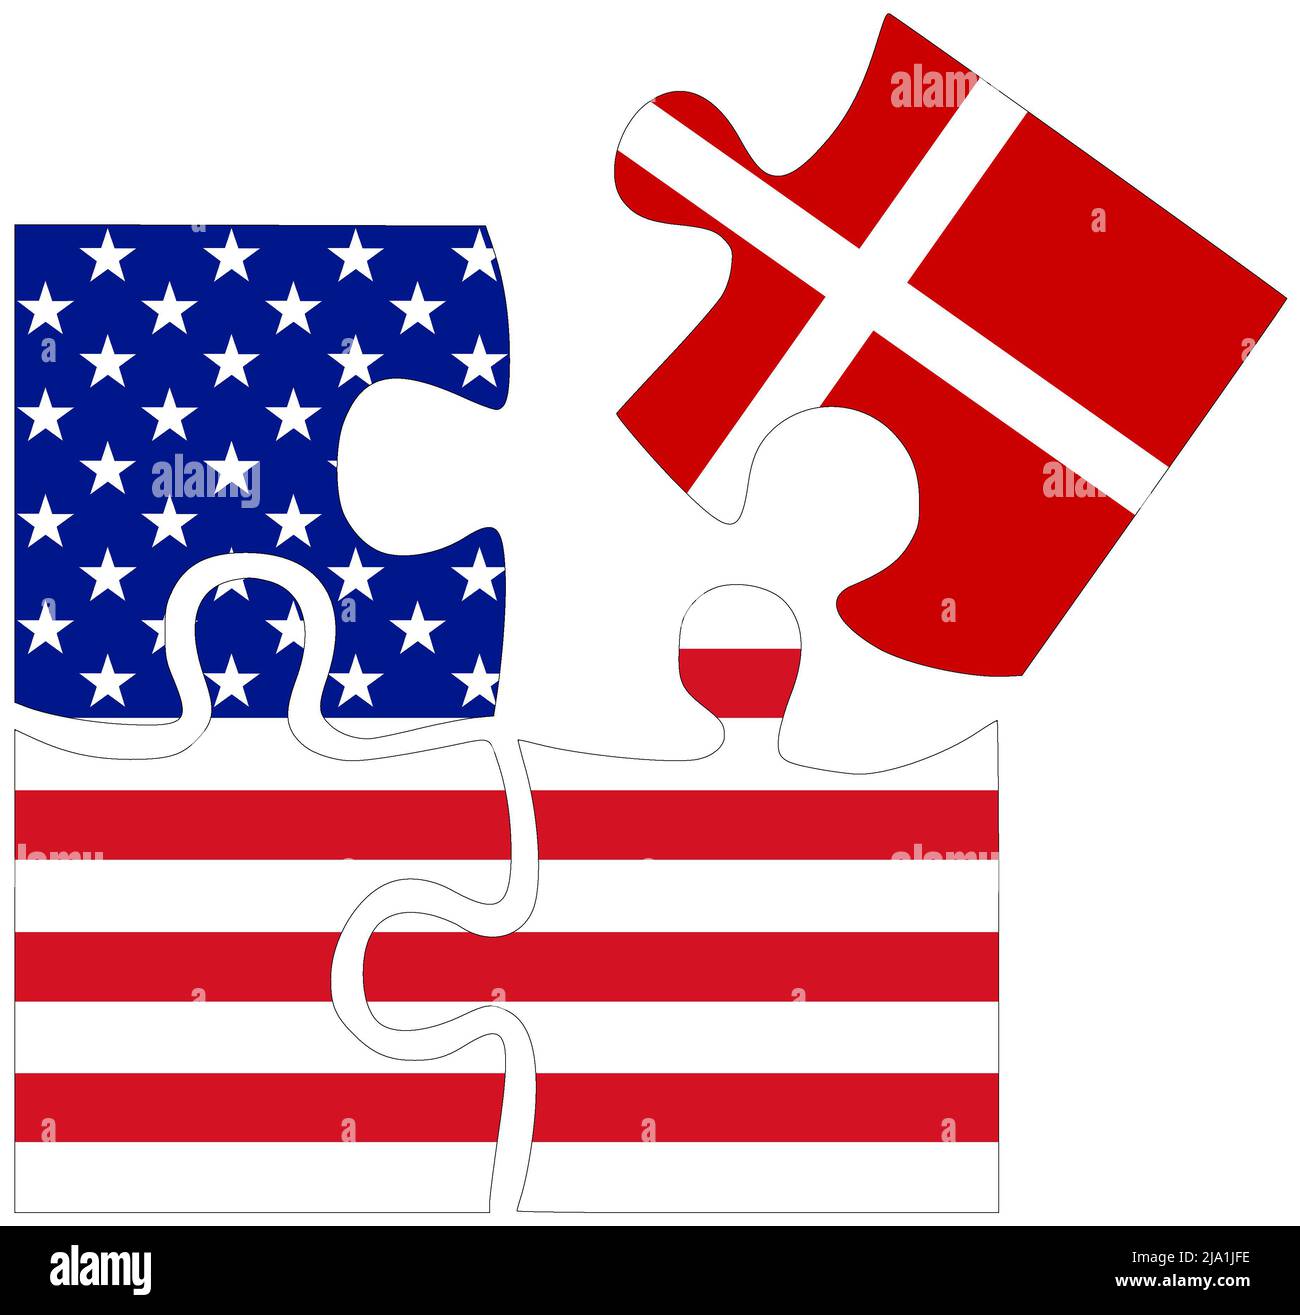 USA - Denmark : puzzle shapes with flags, symbol of agreement or friendship Stock Photo